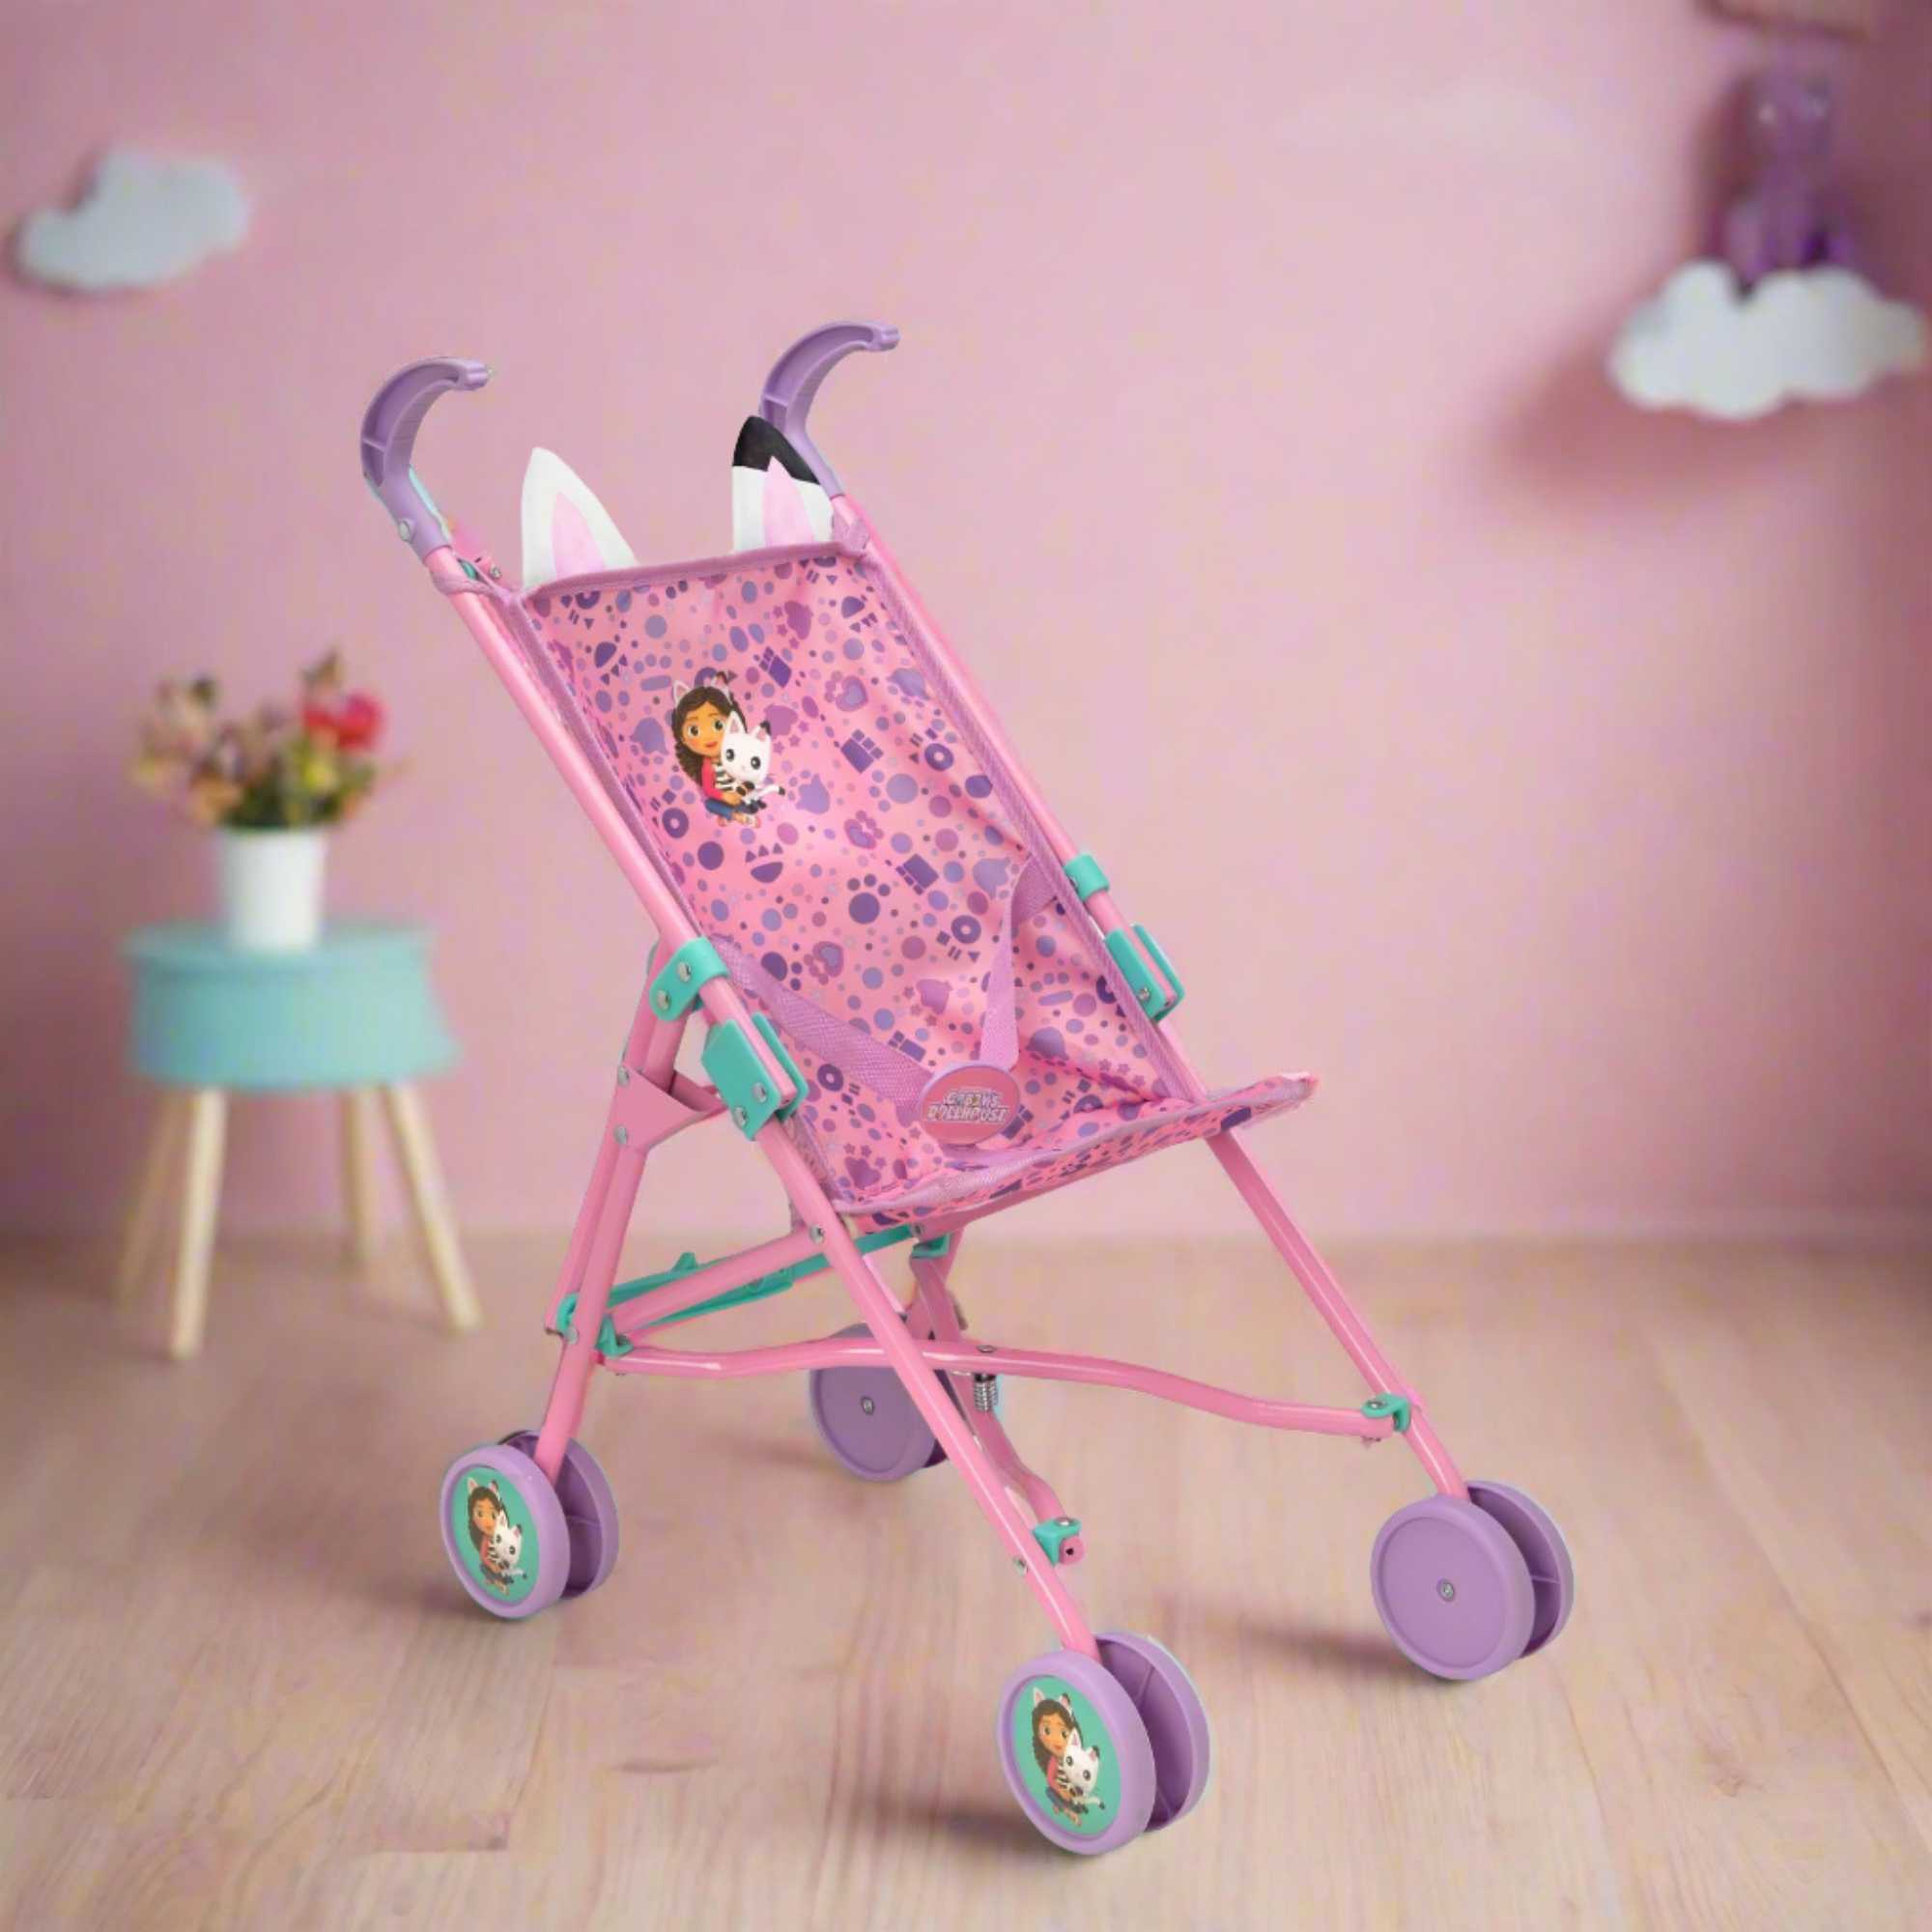 Colourful toy stroller featuring popular characters from Gabby's Dollhouse, designed for children to enjoy pretend play. Ideal for carrying dolls and other small toys, with vibrant designs and sturdy wheels for easy manoeuvrability.